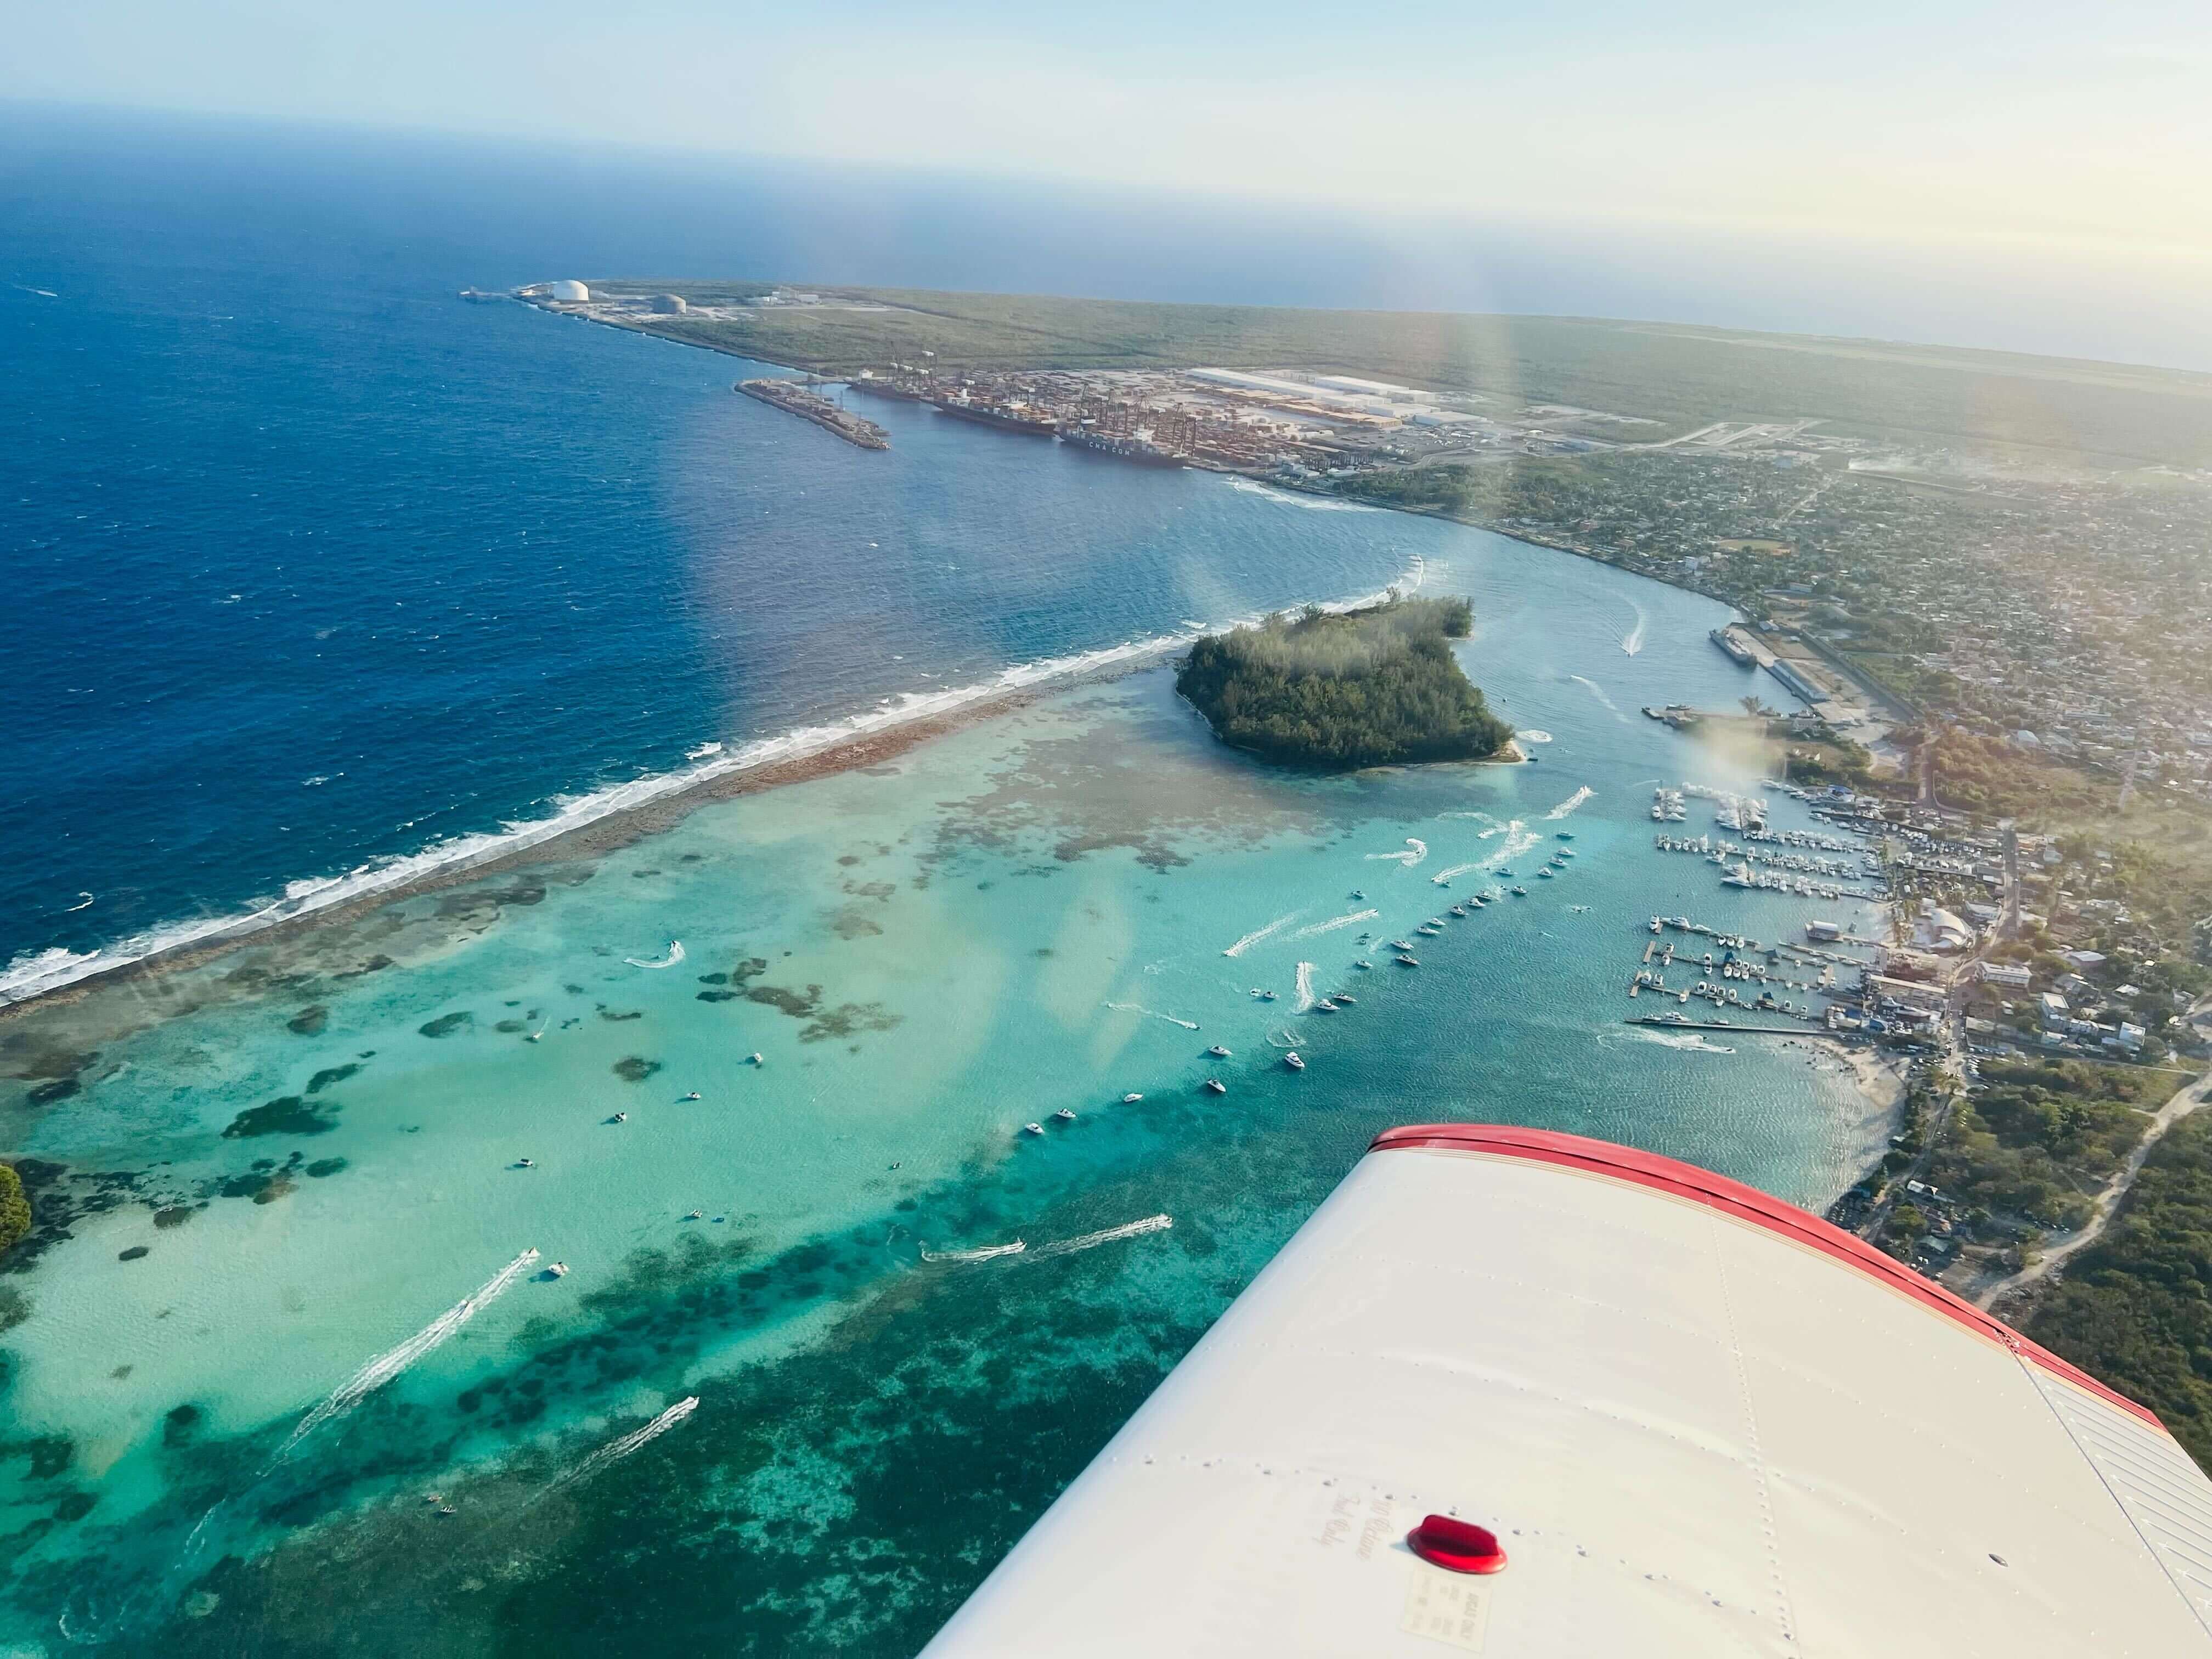 A beautiful view of a coastline, taken from the cockpit of a small plane